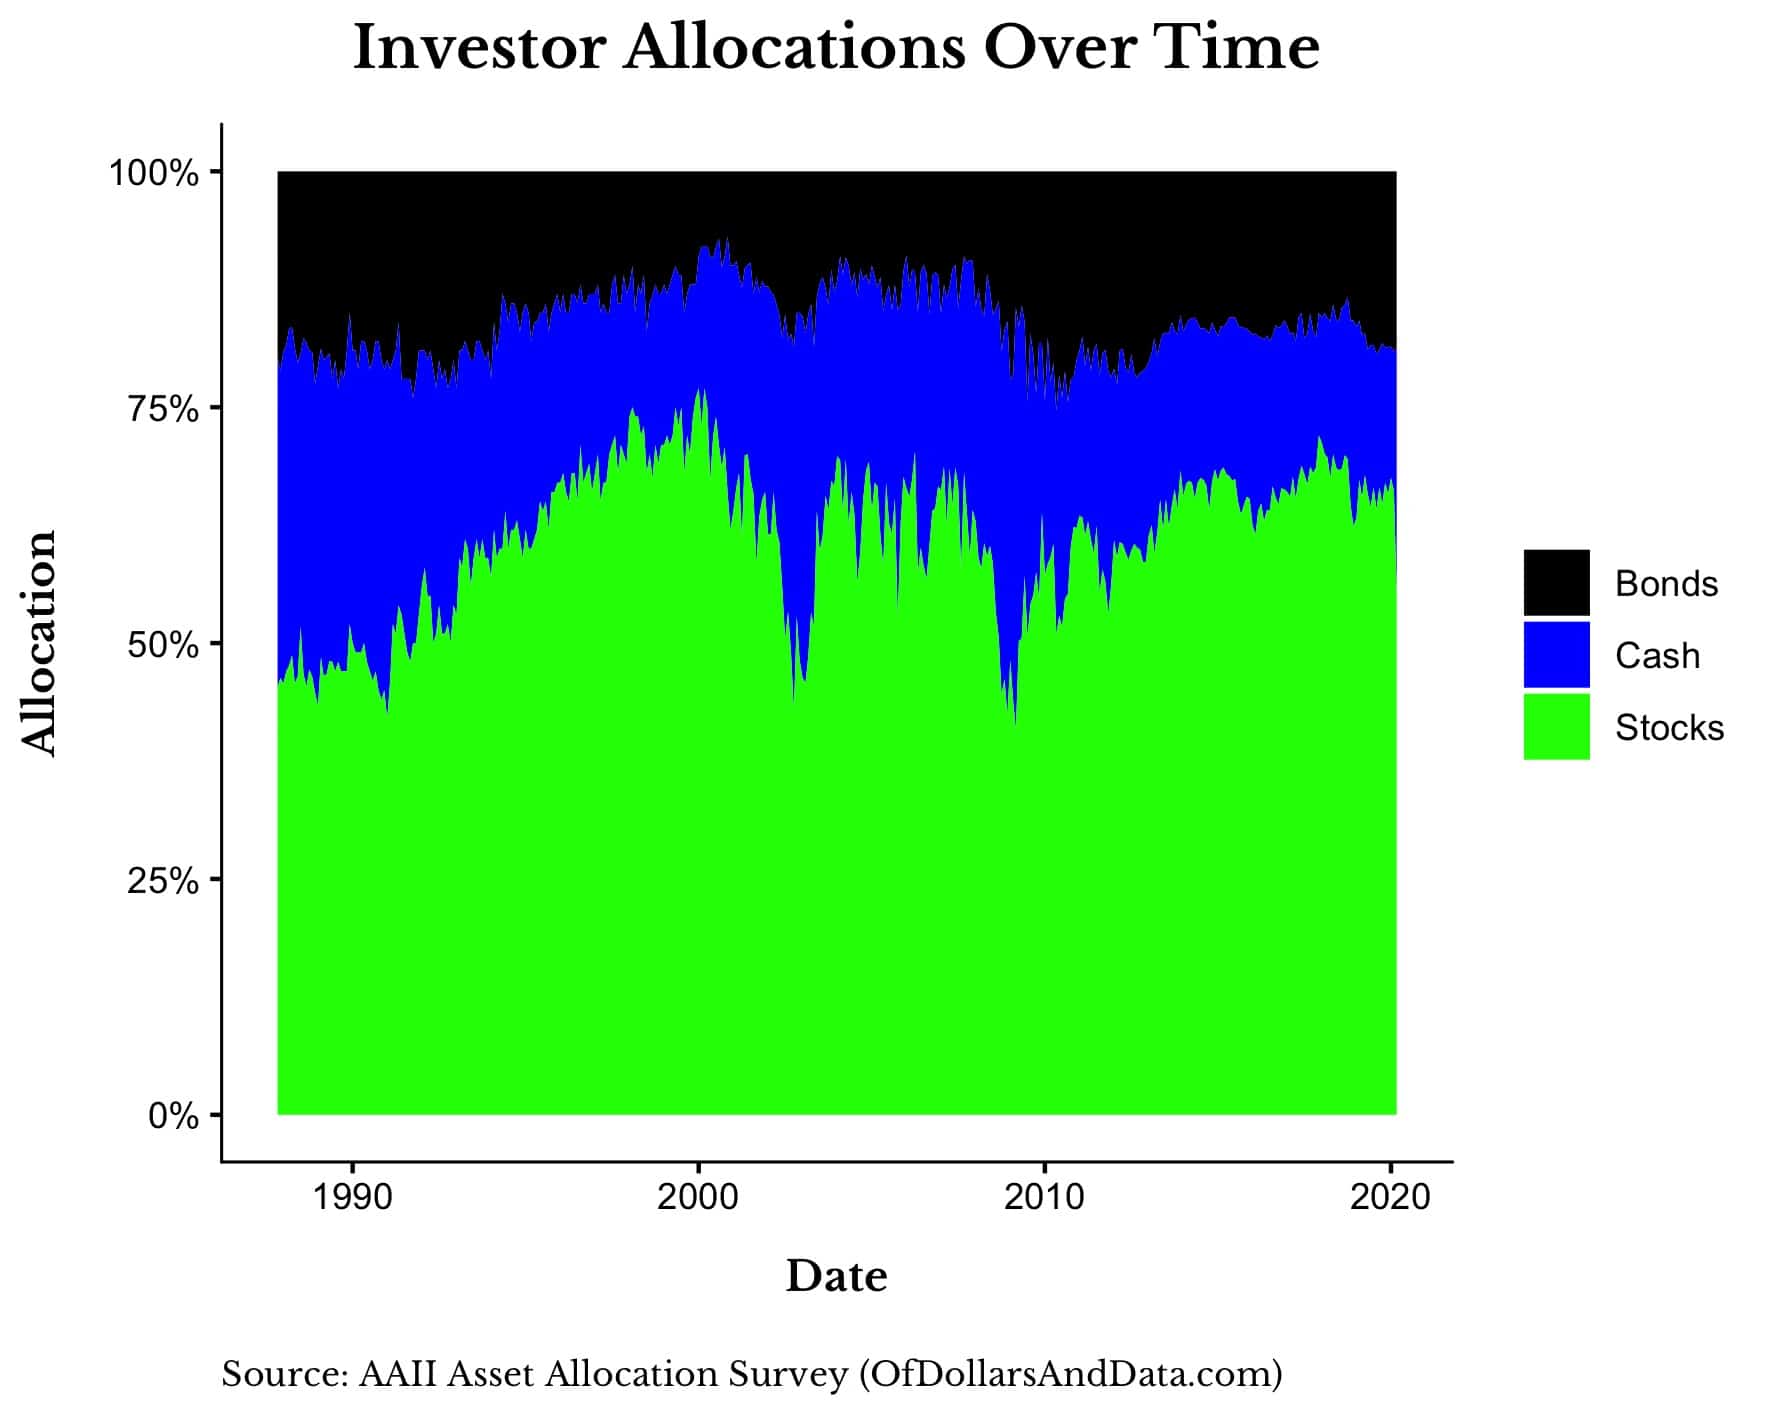 Investor allocations to stocks, bonds, and cash over time